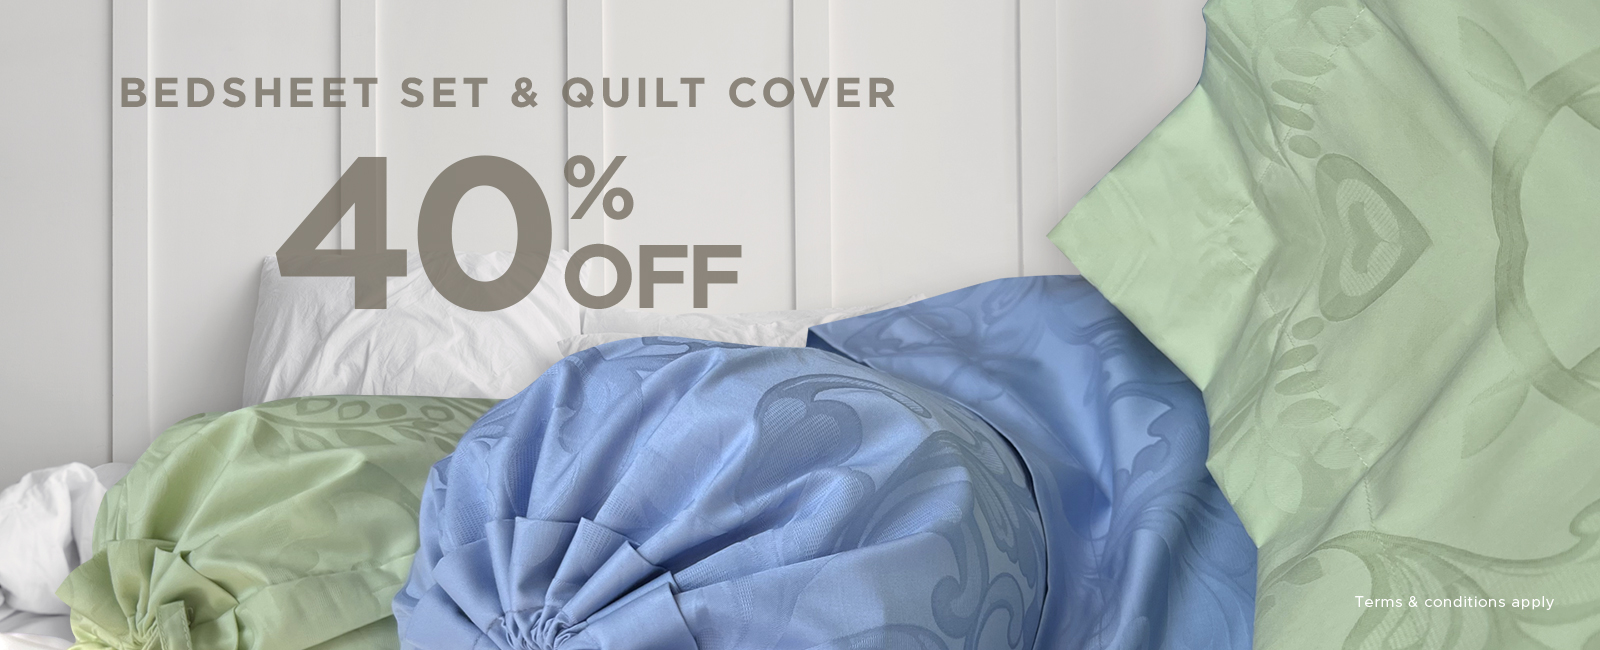 Bed Cover Set Disc 40%